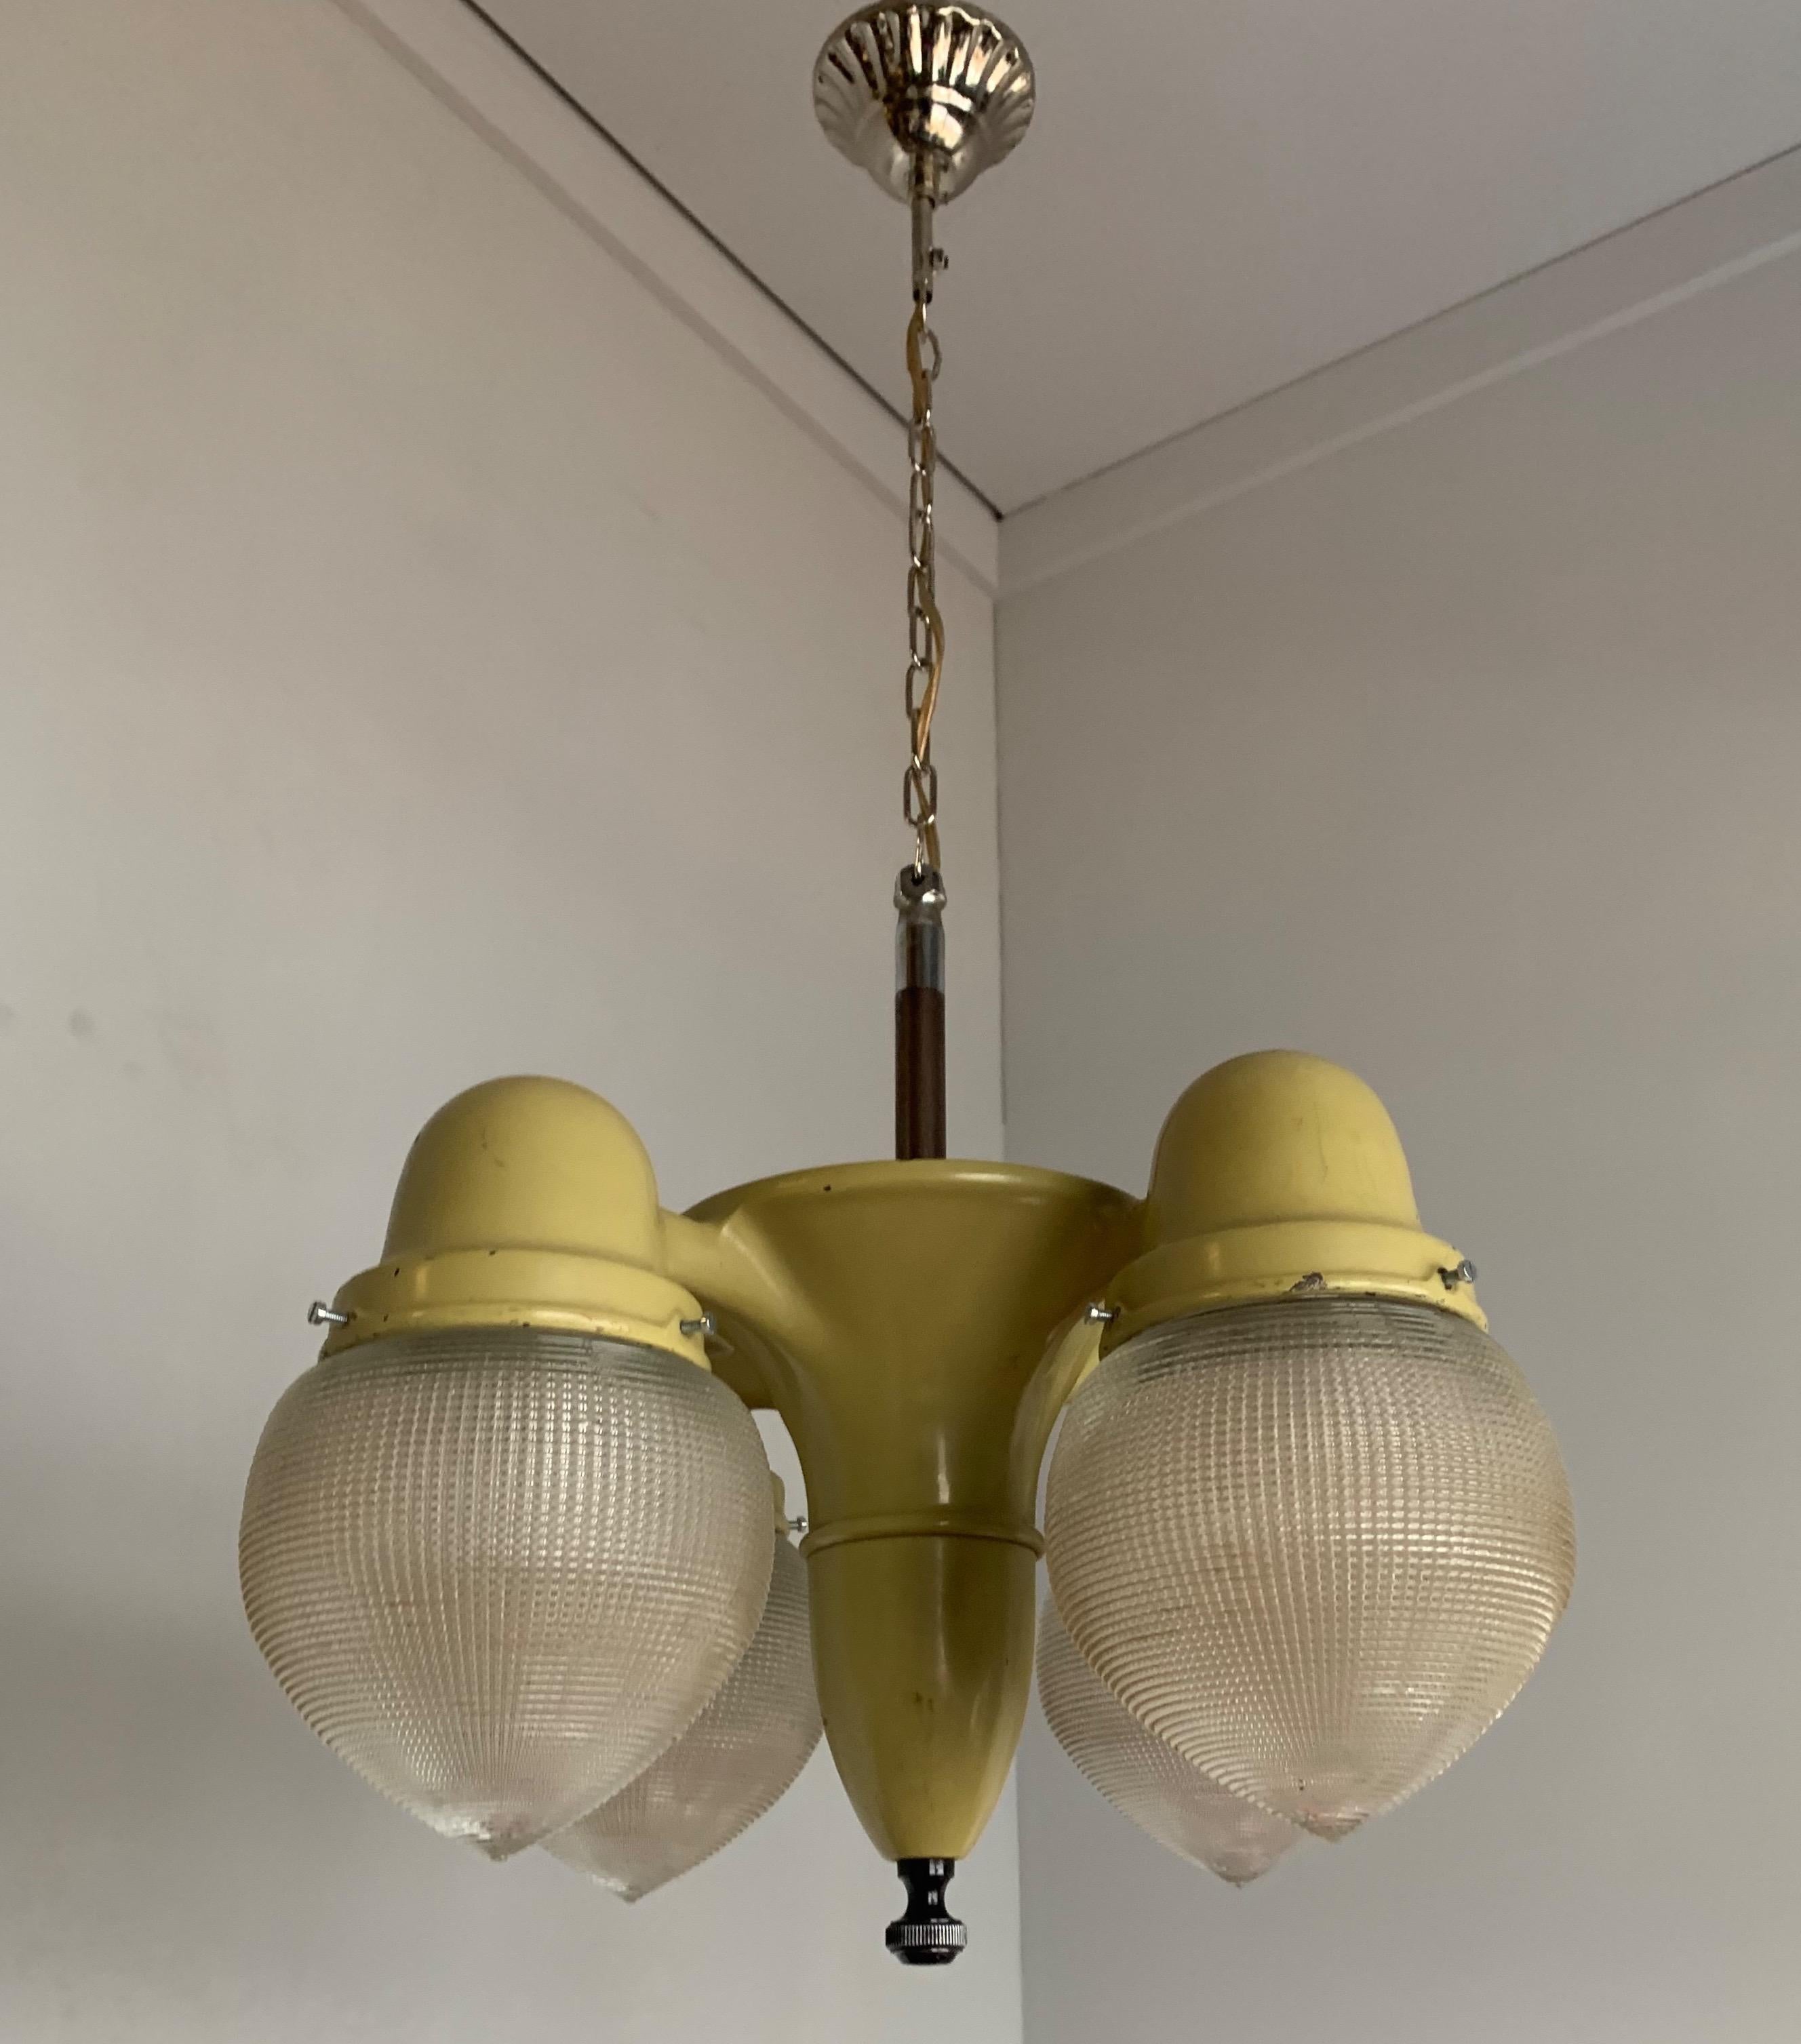 Rare, mid-20th century, industrial pendant.

When you have been trading in light fixtures as long as we have then you might think you have seen it all. This recent rare find however, is unlike anything we ever saw. Because of the uniqueness of the